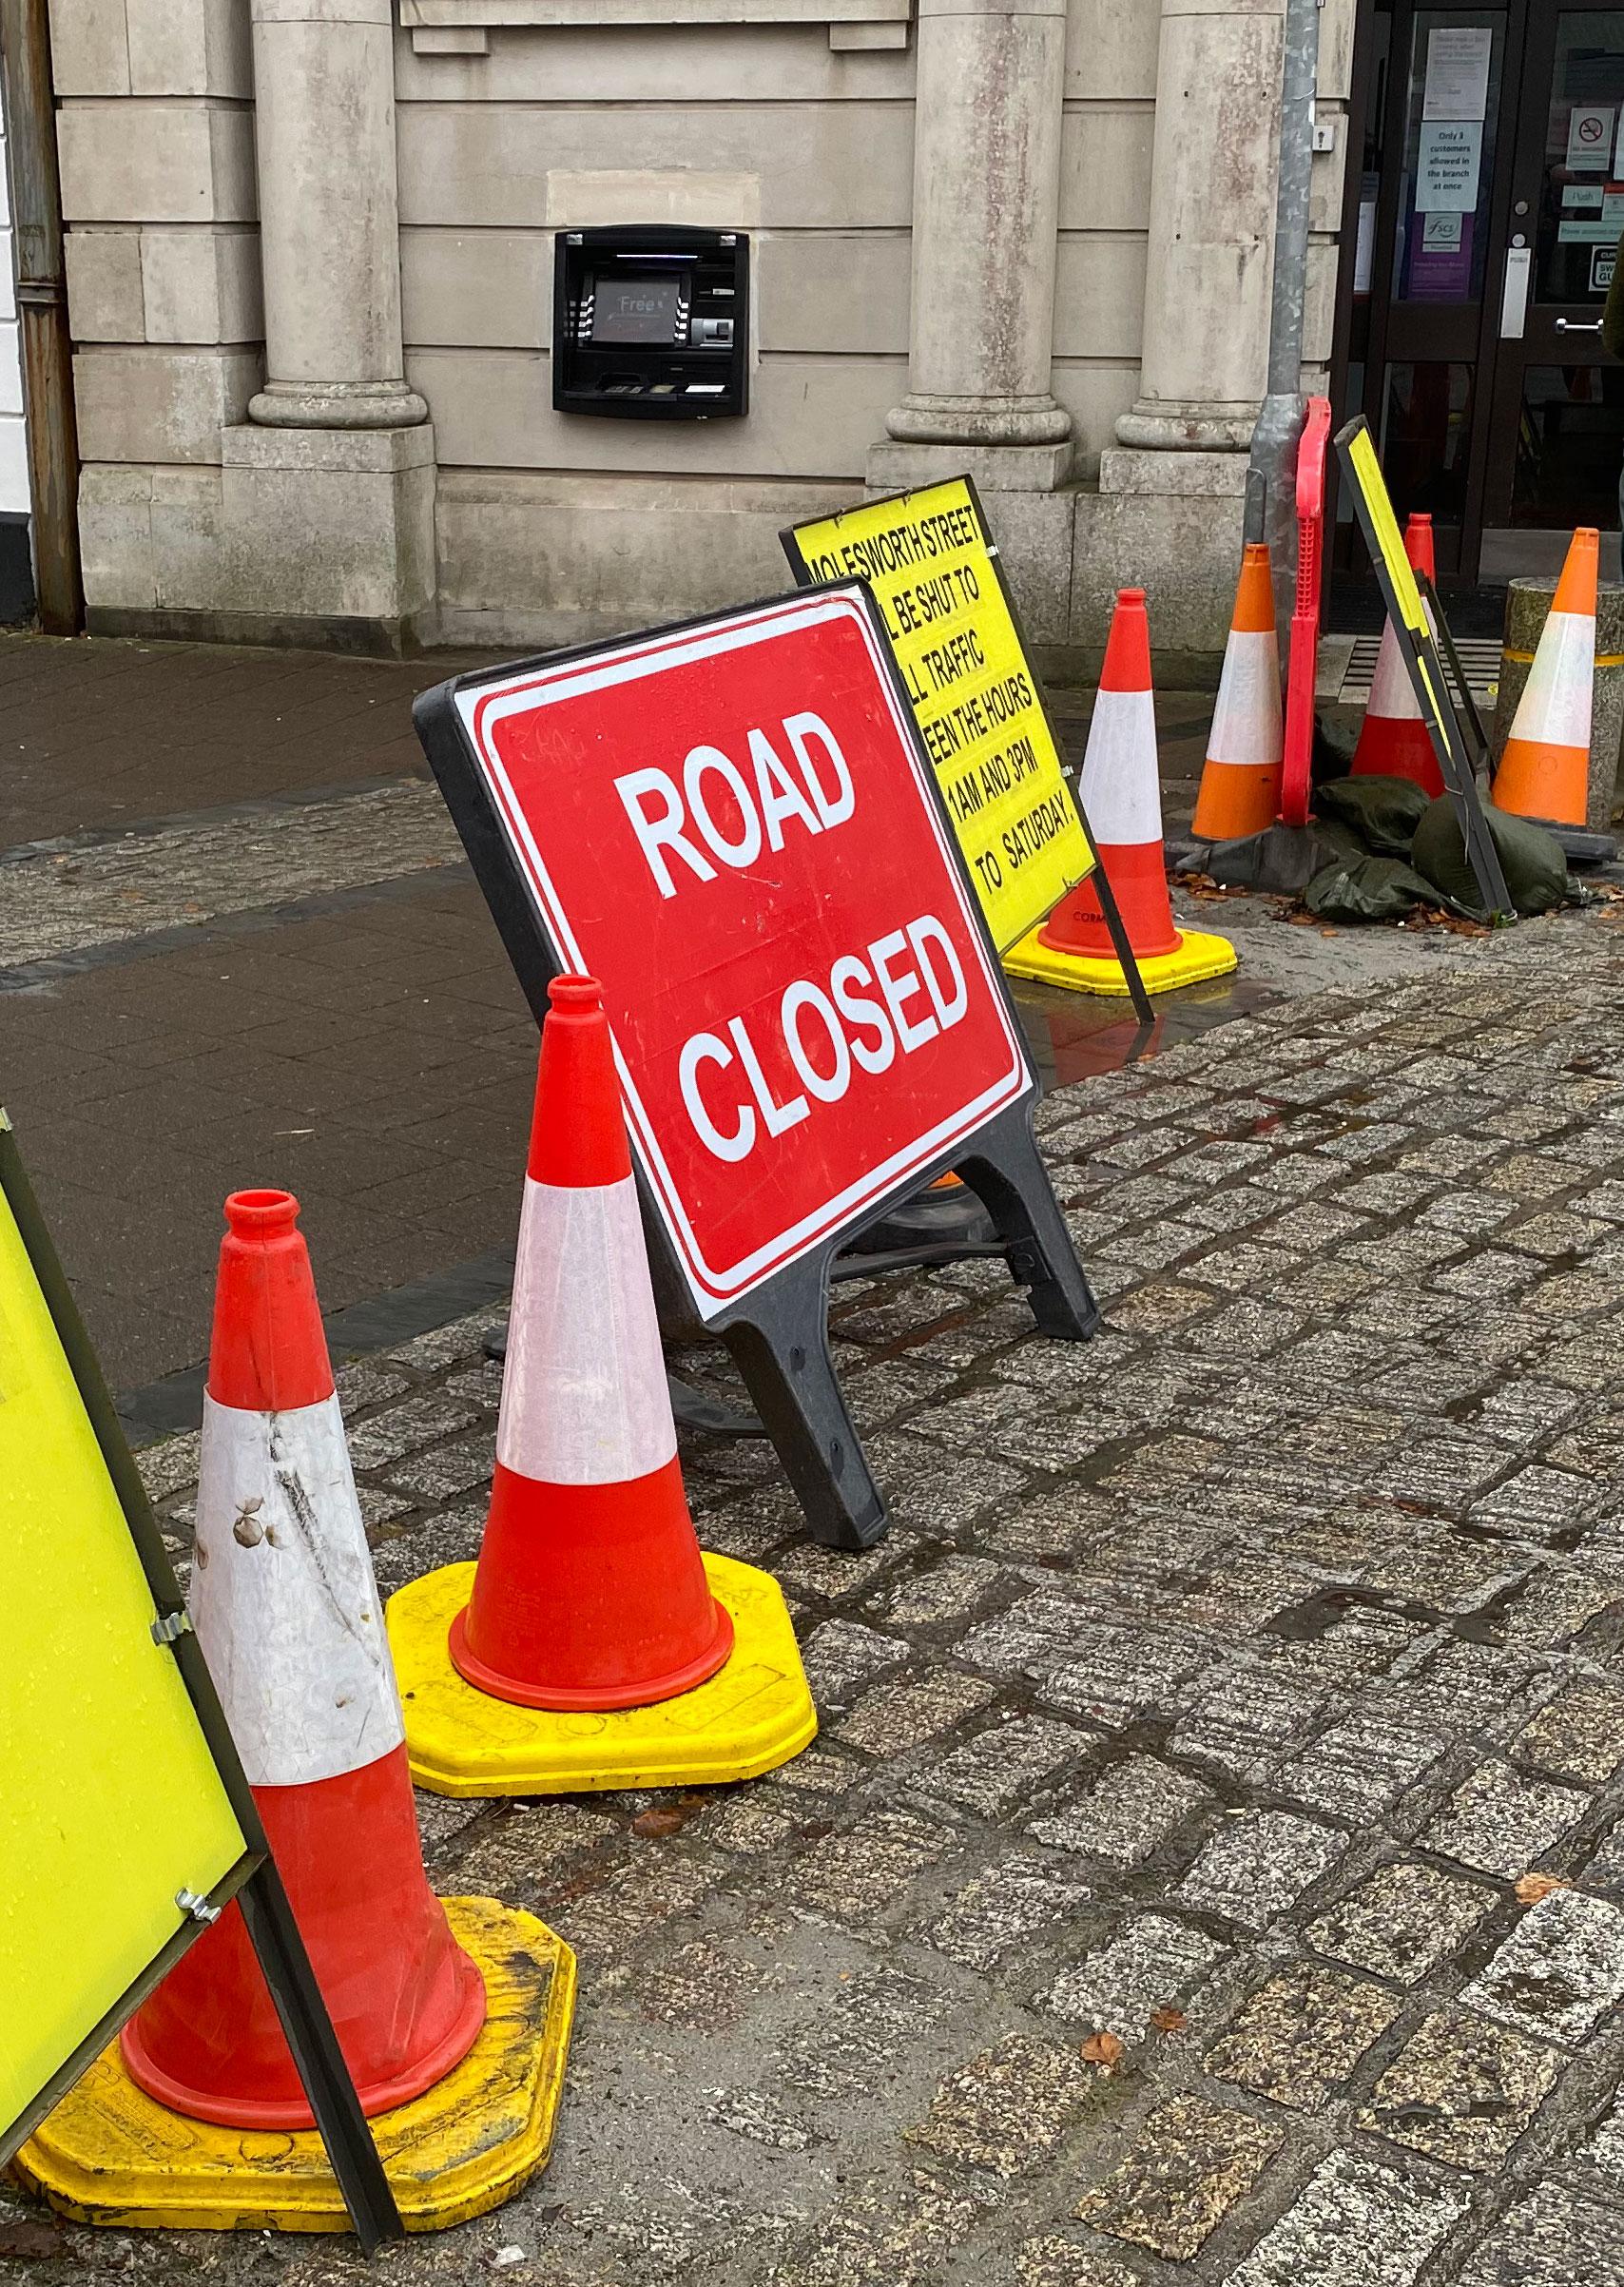 Road closures are necessary for main sewer connections.